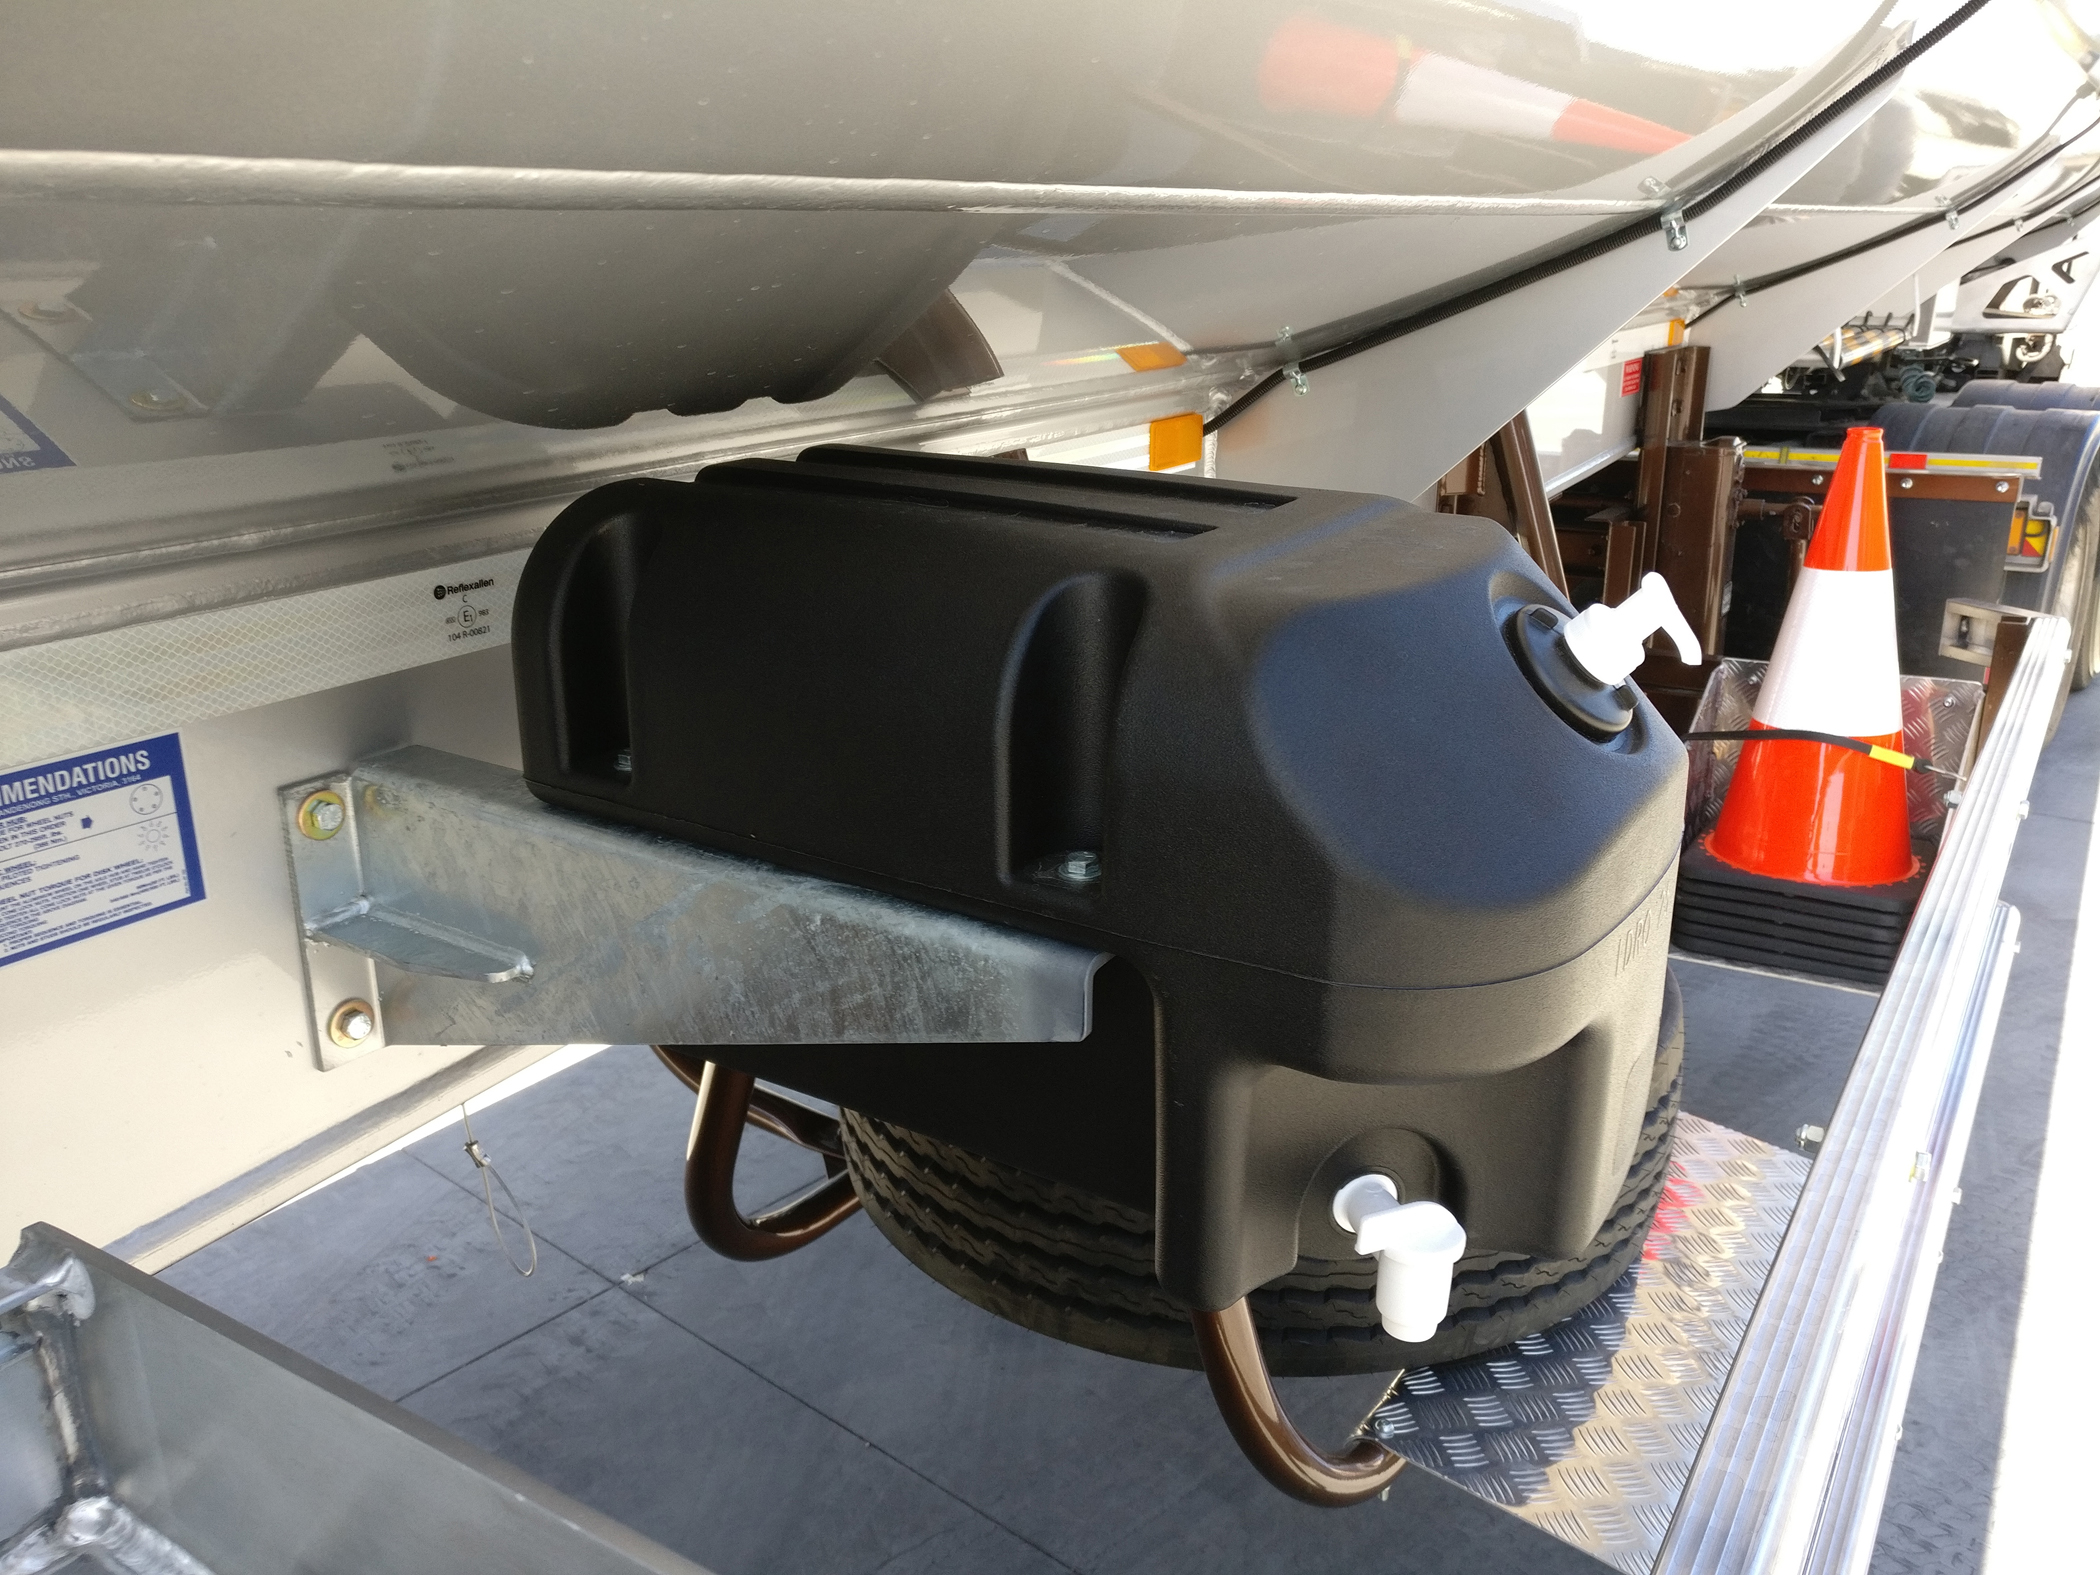 The vehicle-mounted hygiene station enables drivers and crews to sanitize their hands before reentering the vehicle.polypropylene with an additive that makes them resistant to UV rays.